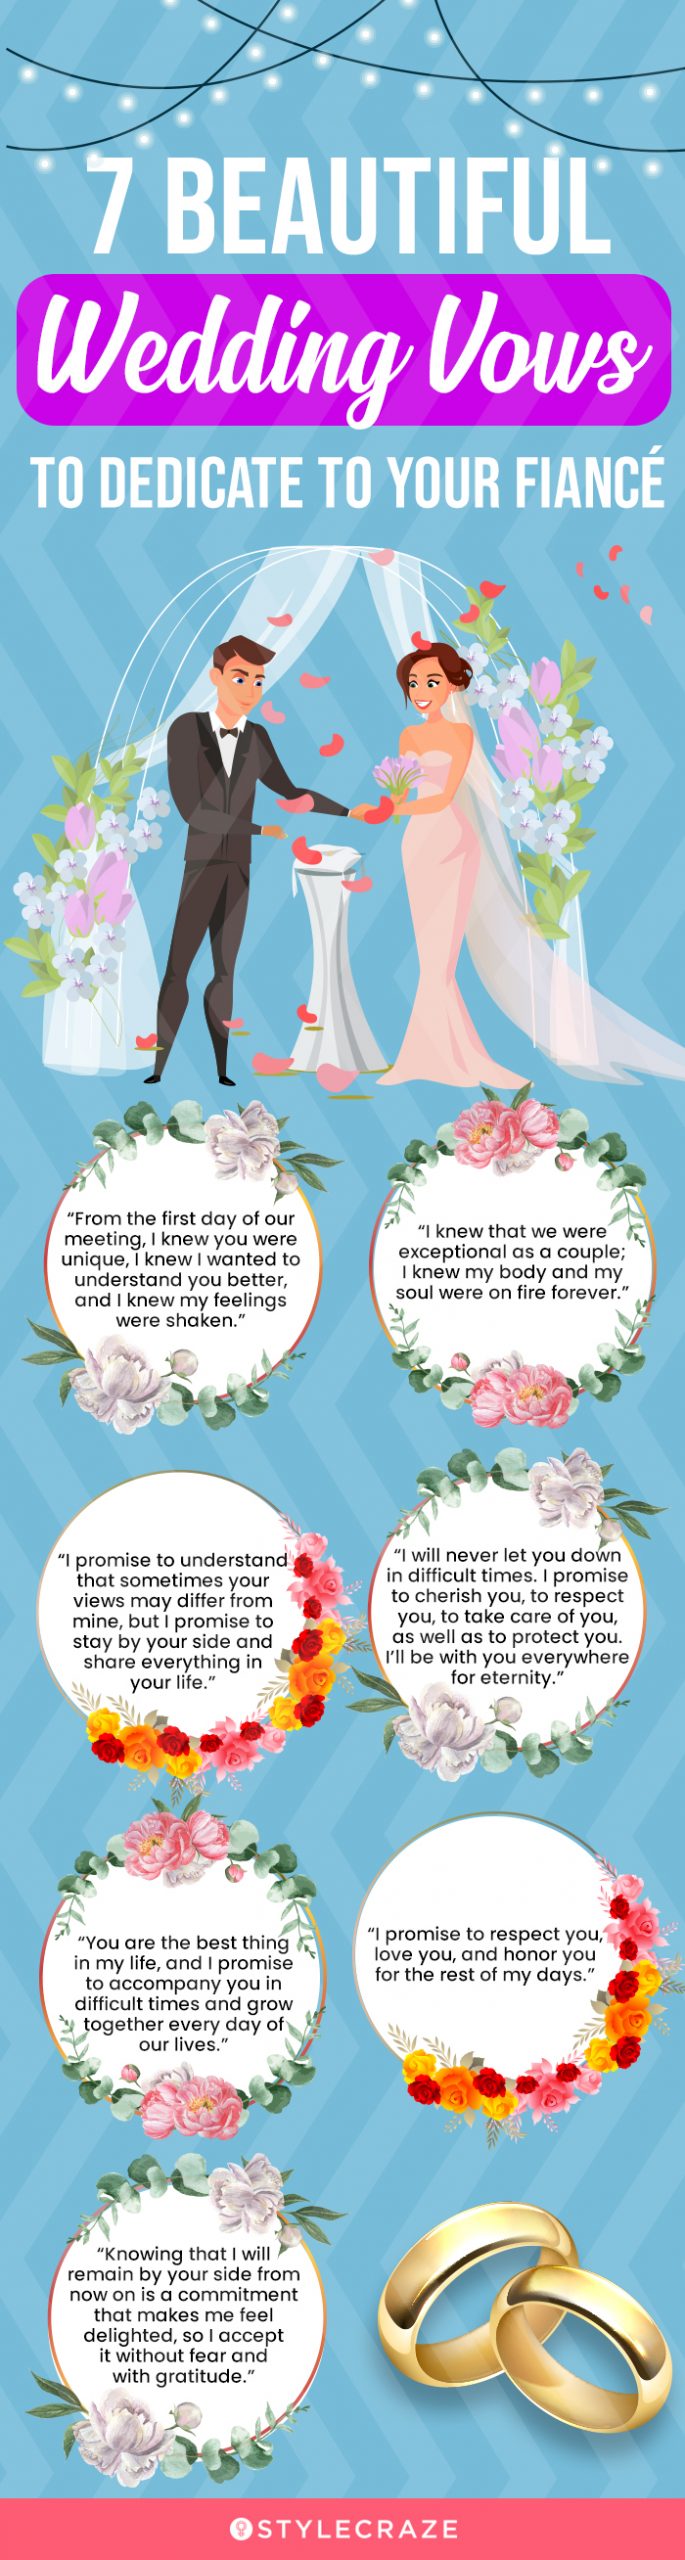 7 beautiful wedding vows to dedicate to your fiancé (infographic)